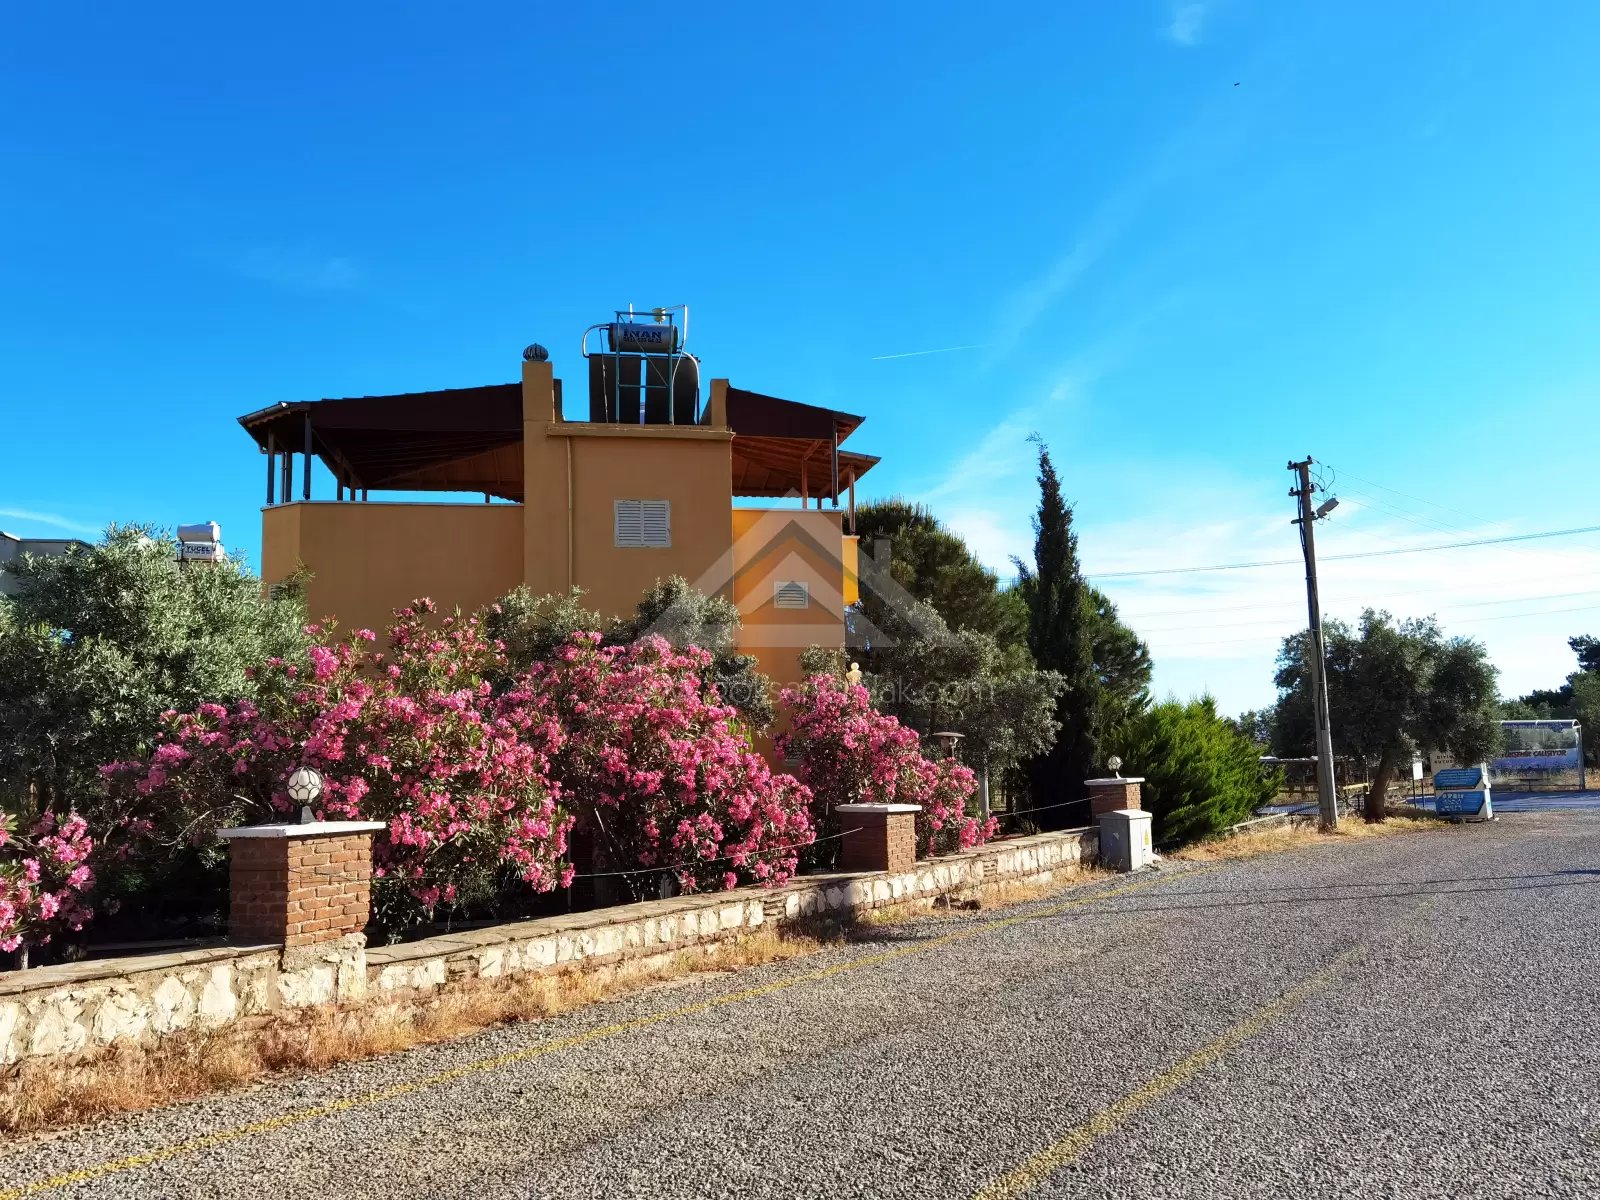 Detached Villa For Sale Near The Main Road With Garden